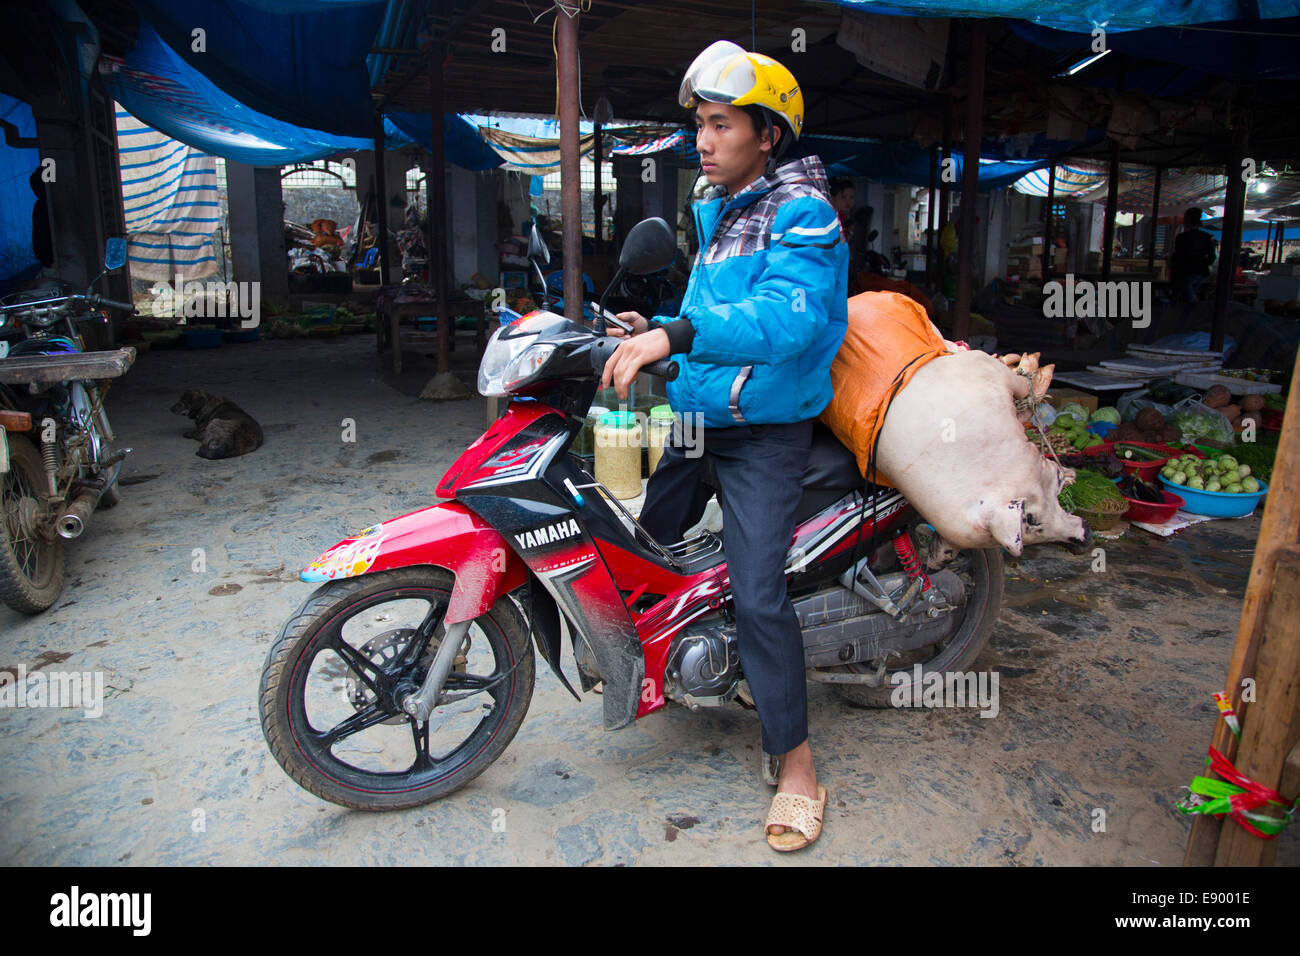 Vietnamese Hill Tribe Hmong man on motorcycle at Bac Ha sunday market carrying pig to butcher Stock Photo